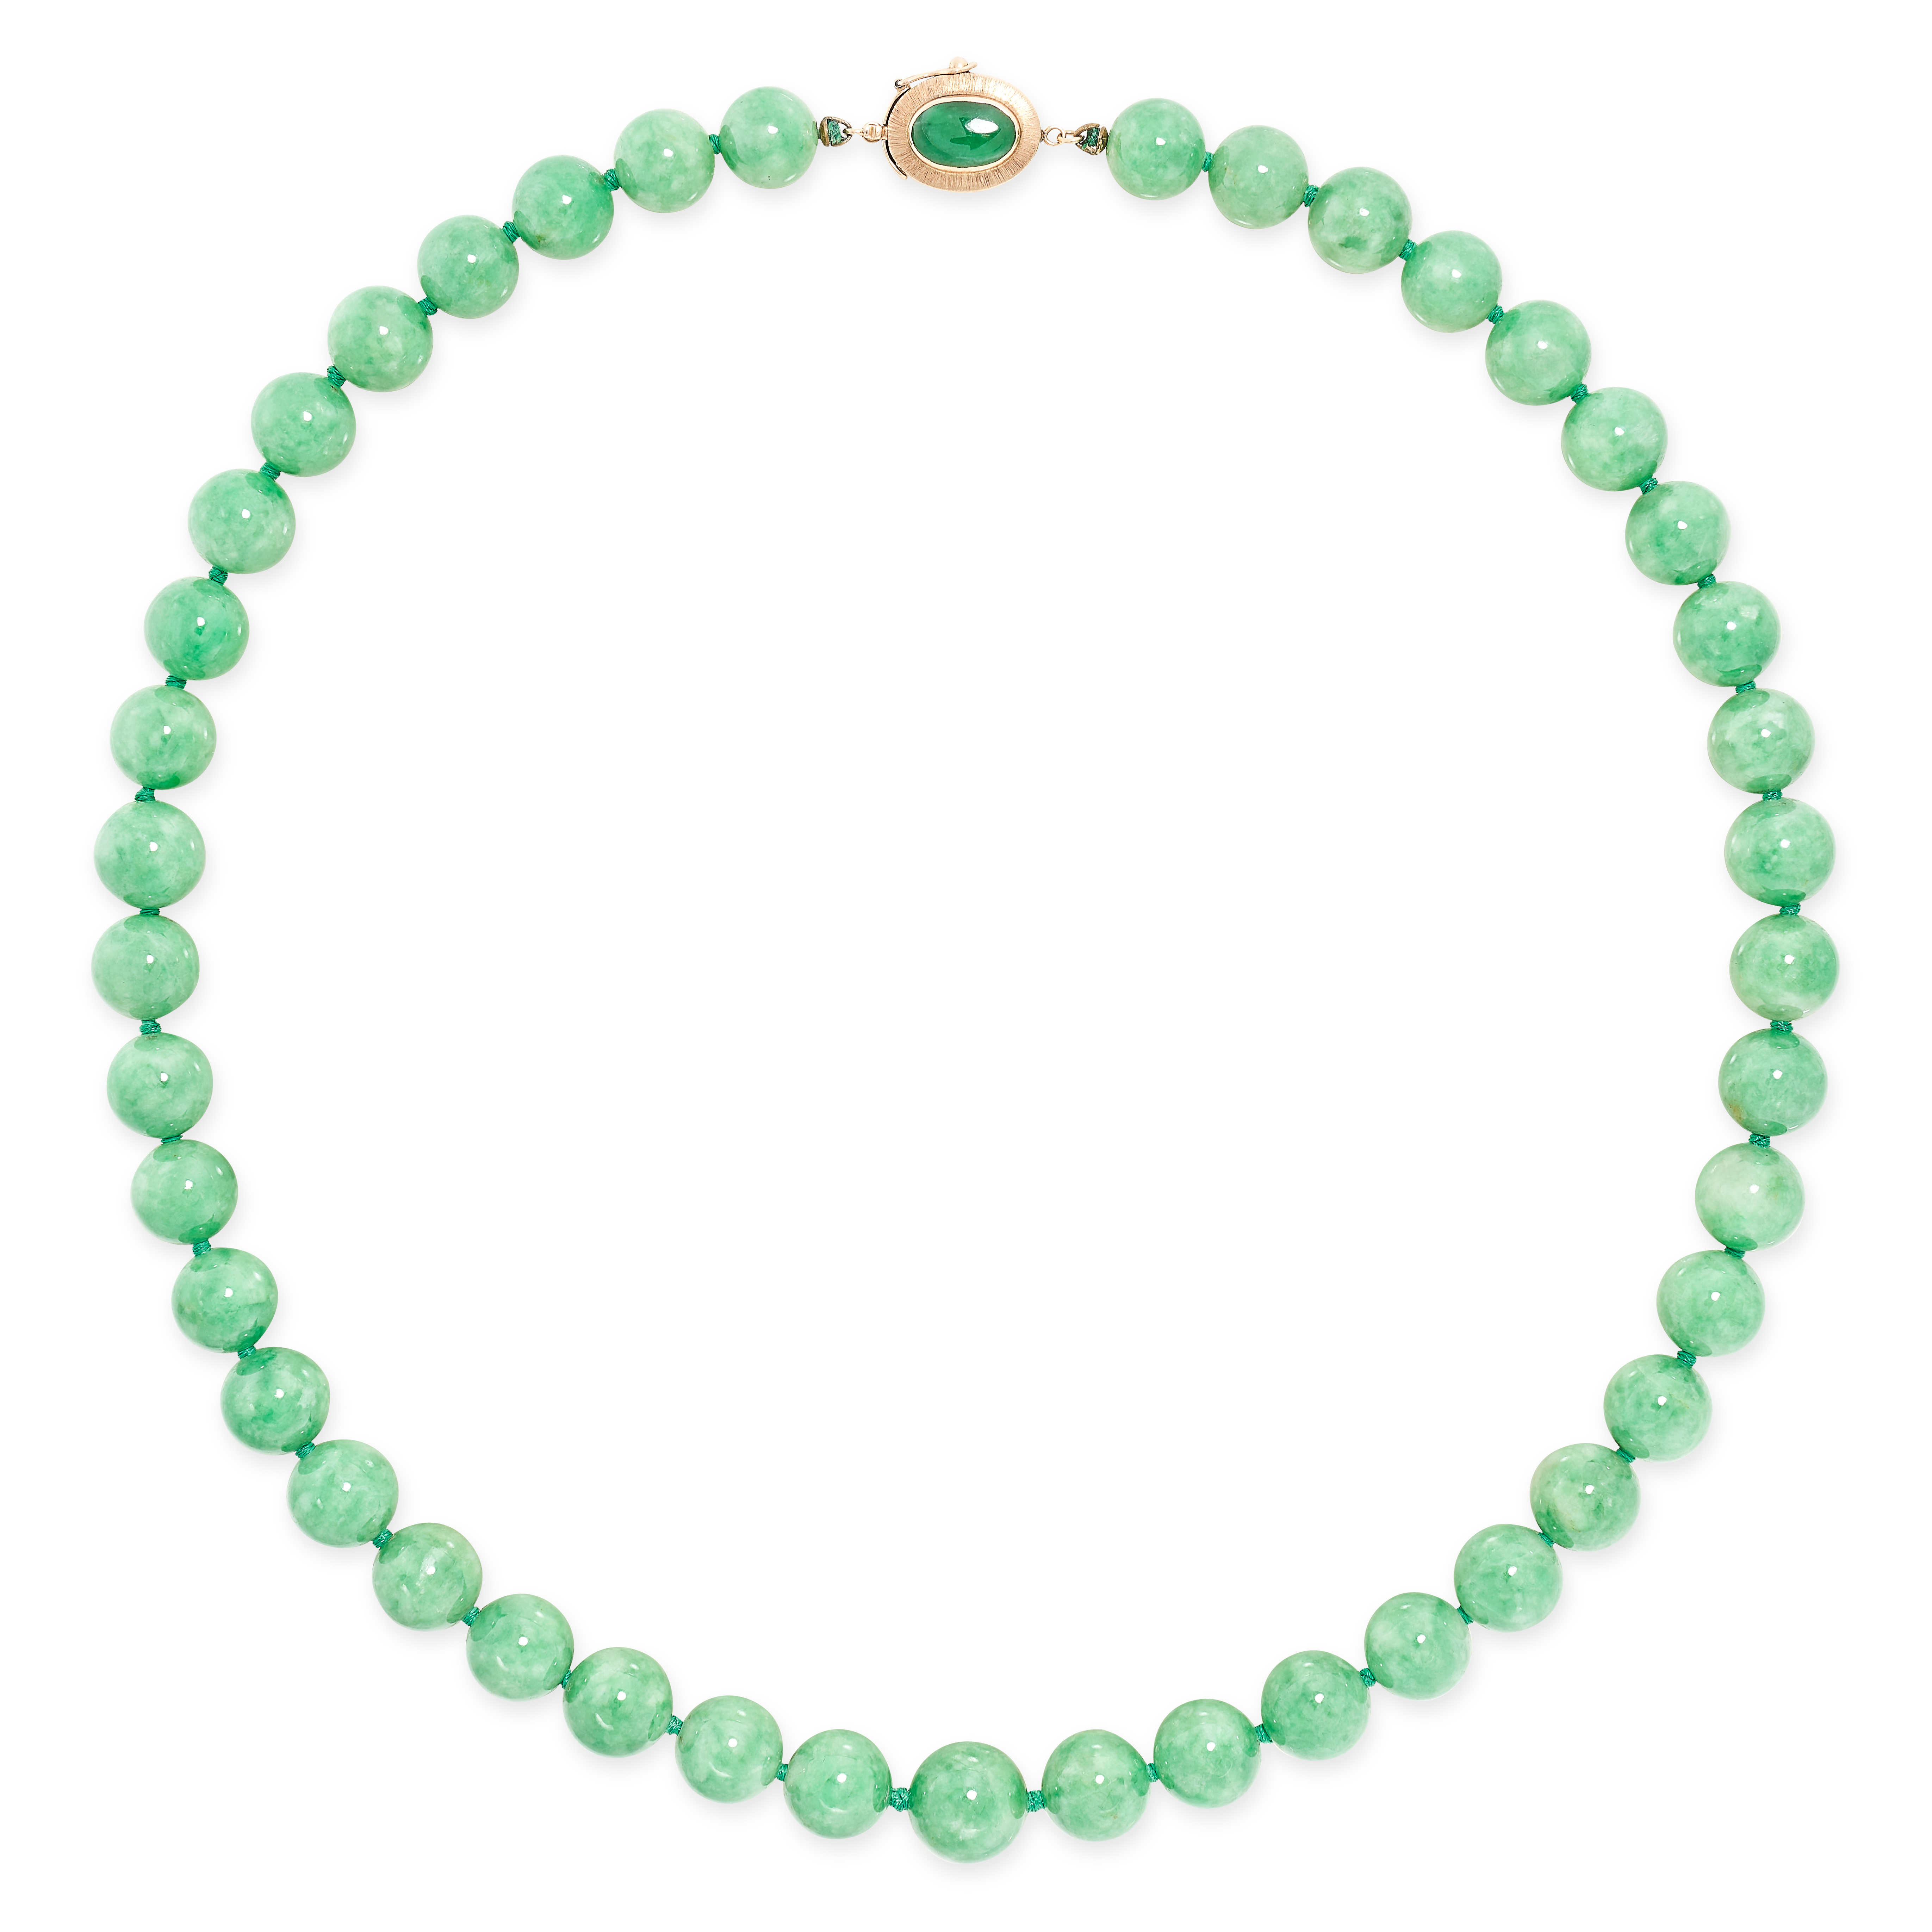 A NATURAL JADEITE JADE BEAD NECKLACE in 14ct yellow gold, comprising a single row of polished